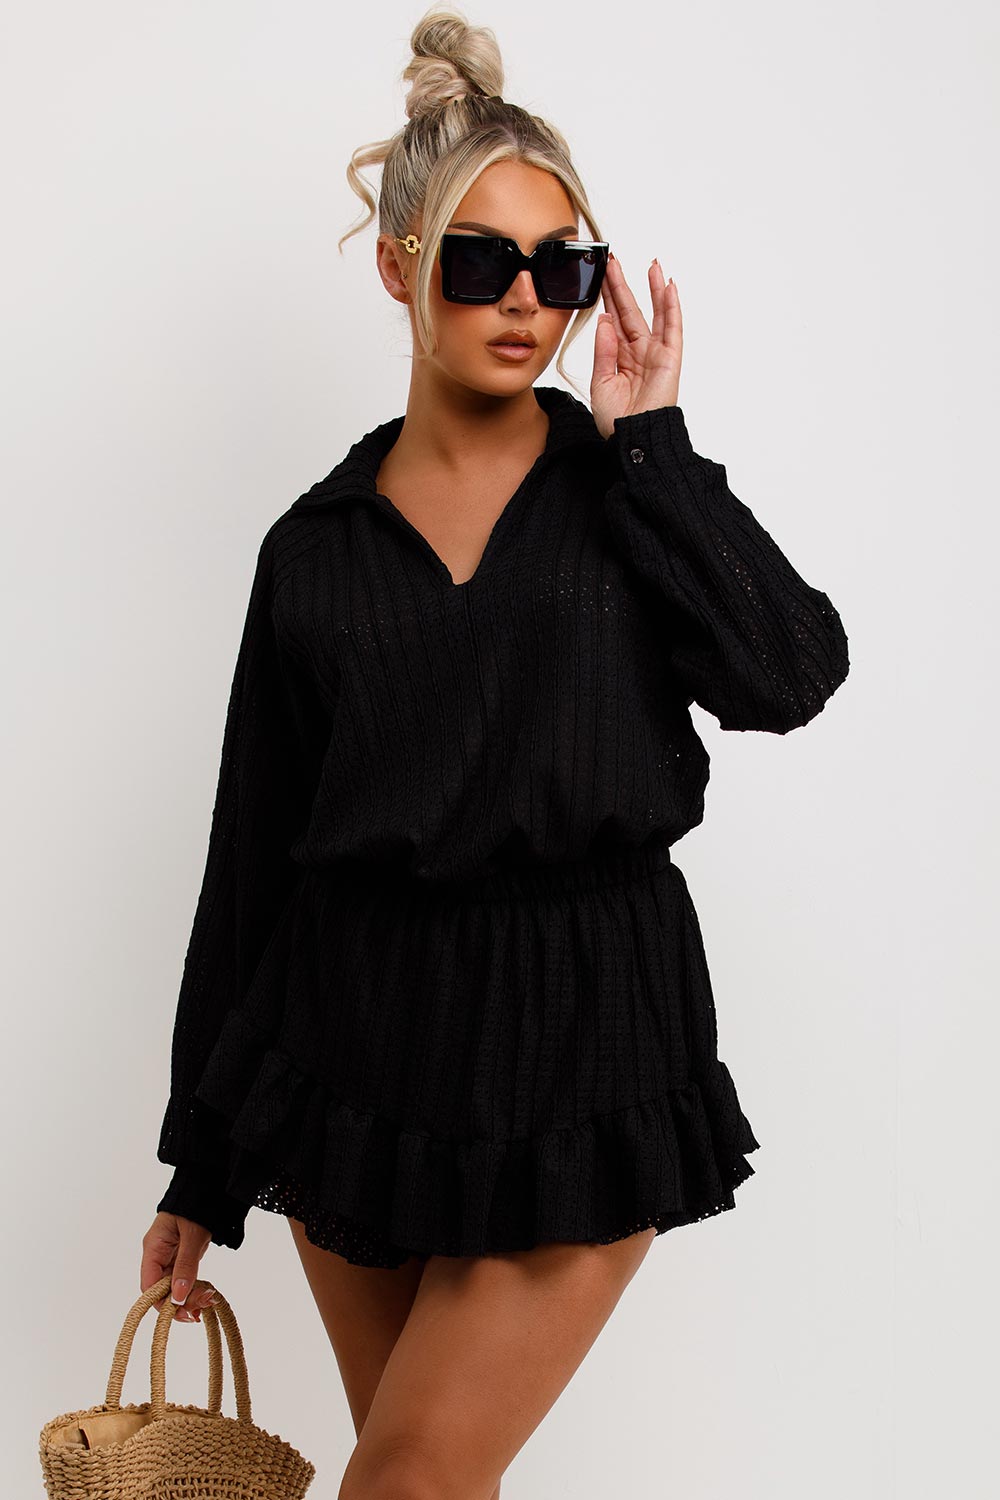 womens black top and shorts set summer holiday outfit